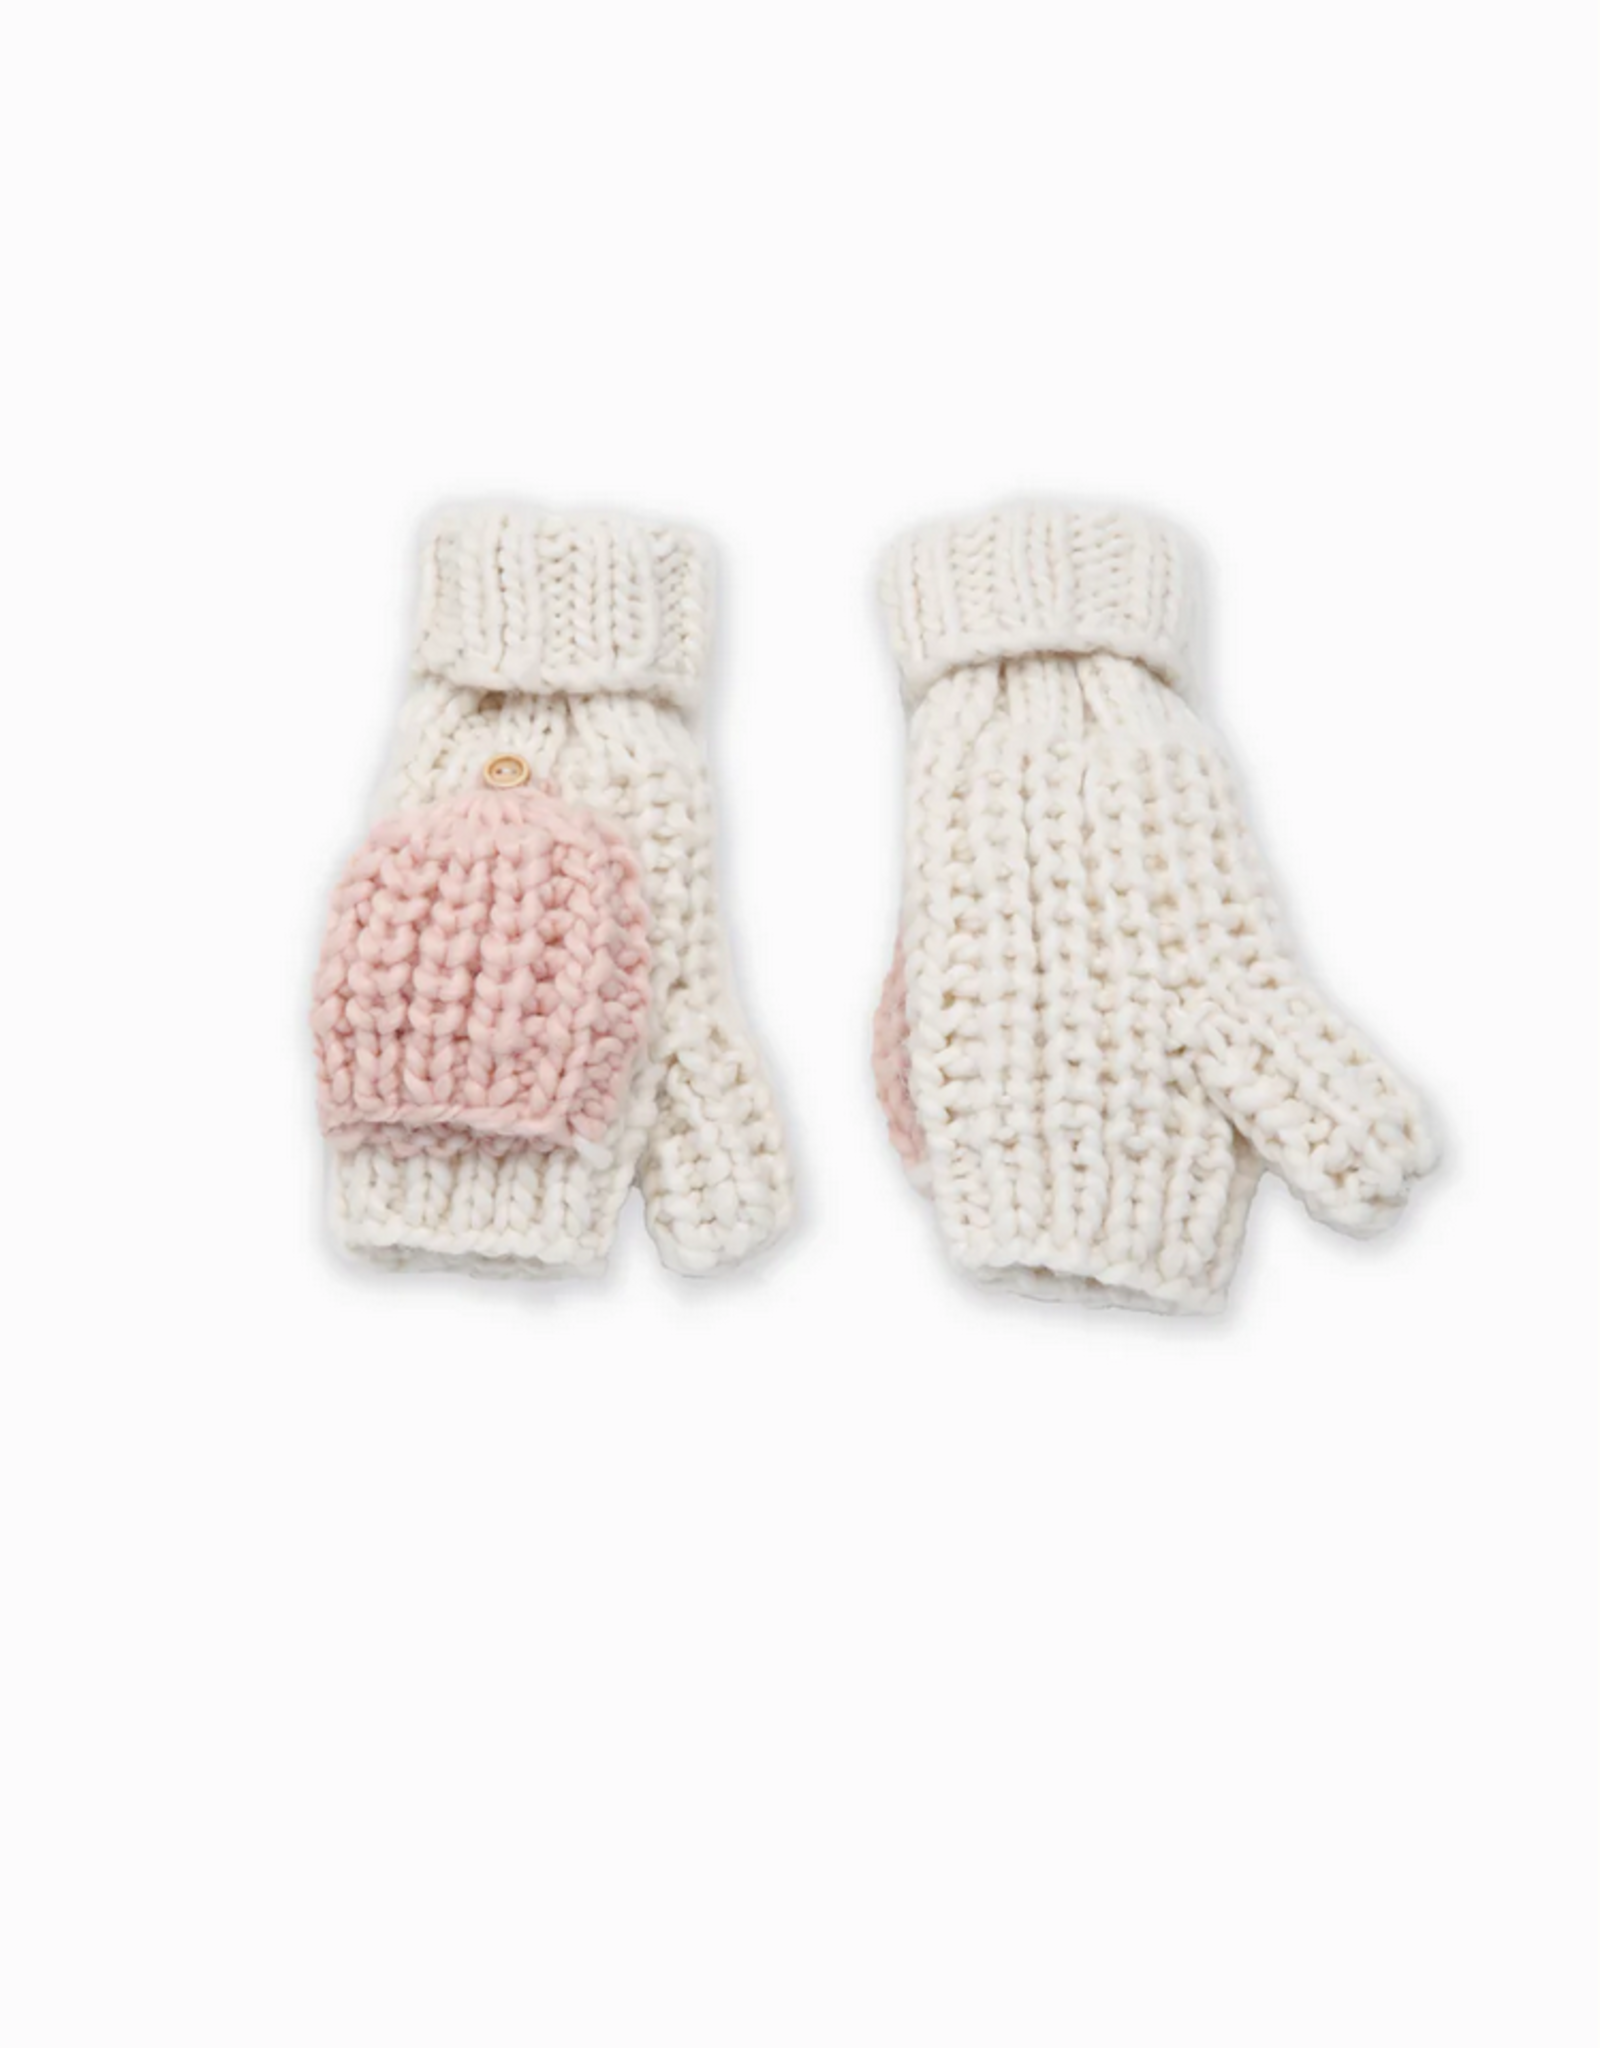 Look By M Hand-Knitted Cotton Candy Flip Mitten Gloves